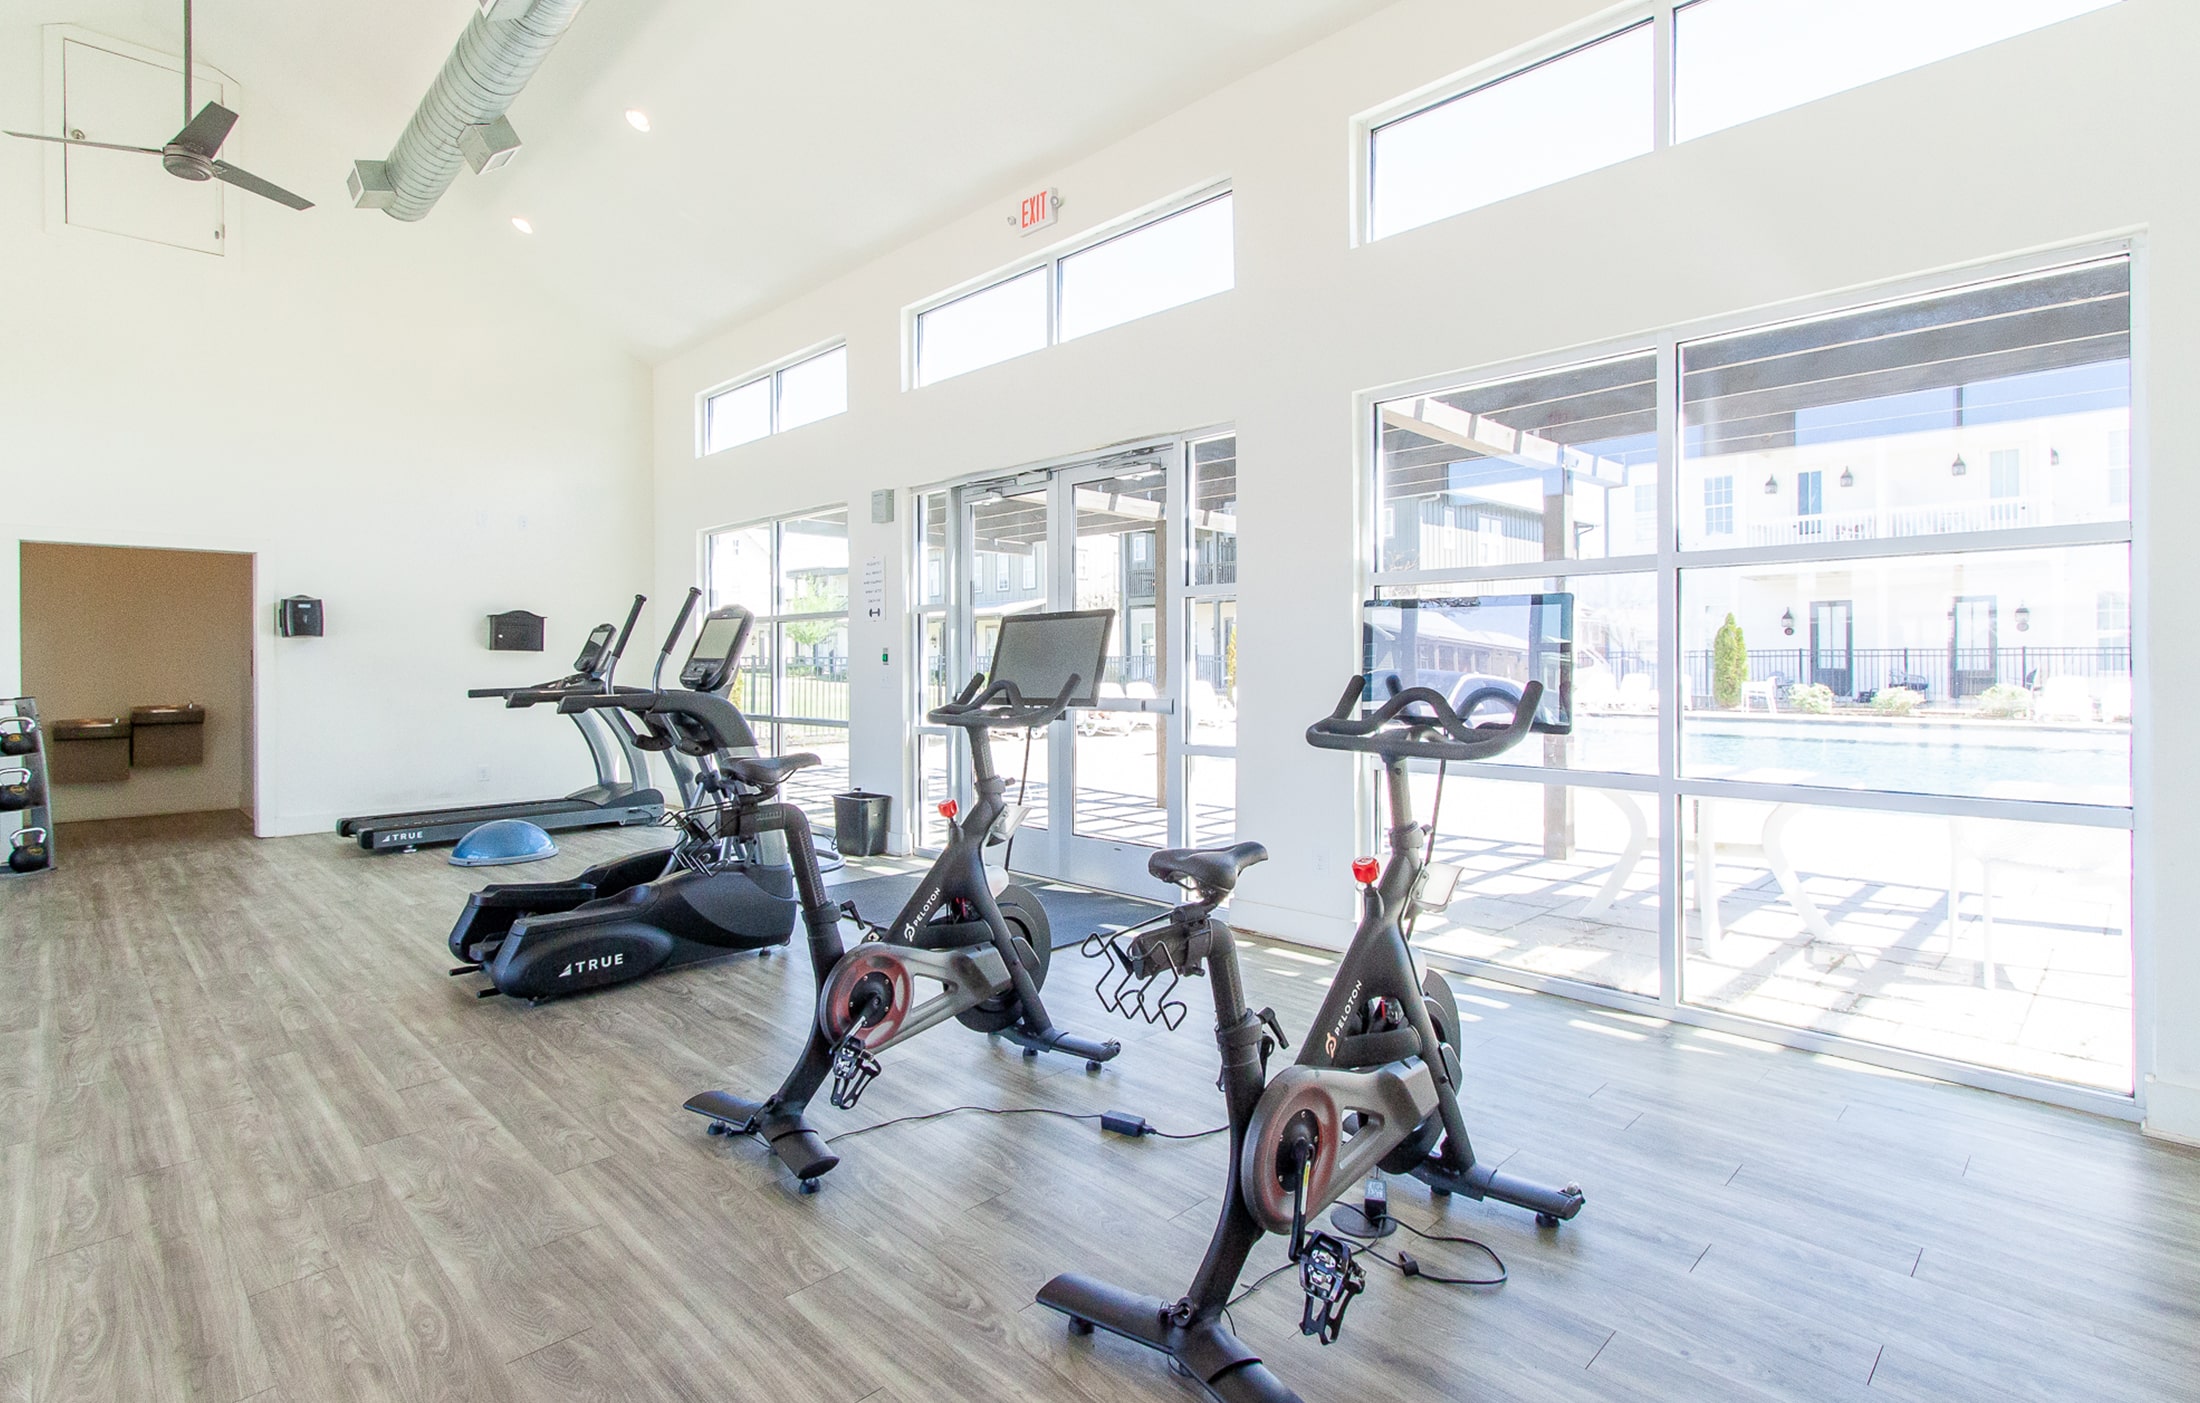 A brightly lit fitness room with large windows overlooking a cityscape, located at Midtown Auburn. The room is equipped with two Peloton cycles and a treadmill, offering a variety of workout options. The Peloton cycles are located at the forefront of the room, with sleek screens displaying fitness metrics and other information. The treadmill is positioned towards the back of the room, with a fan and a water bottle holder attached to it. The room is decorated with motivational quotes and has a mirror spanning the length of one of the walls, allowing gym-goers to check their form. The flooring is made of black rubber tiles, and the ceiling features several industrial-style light fixtures. Overall, the scene suggests a modern and well-equipped fitness facility at Midtown Auburn.